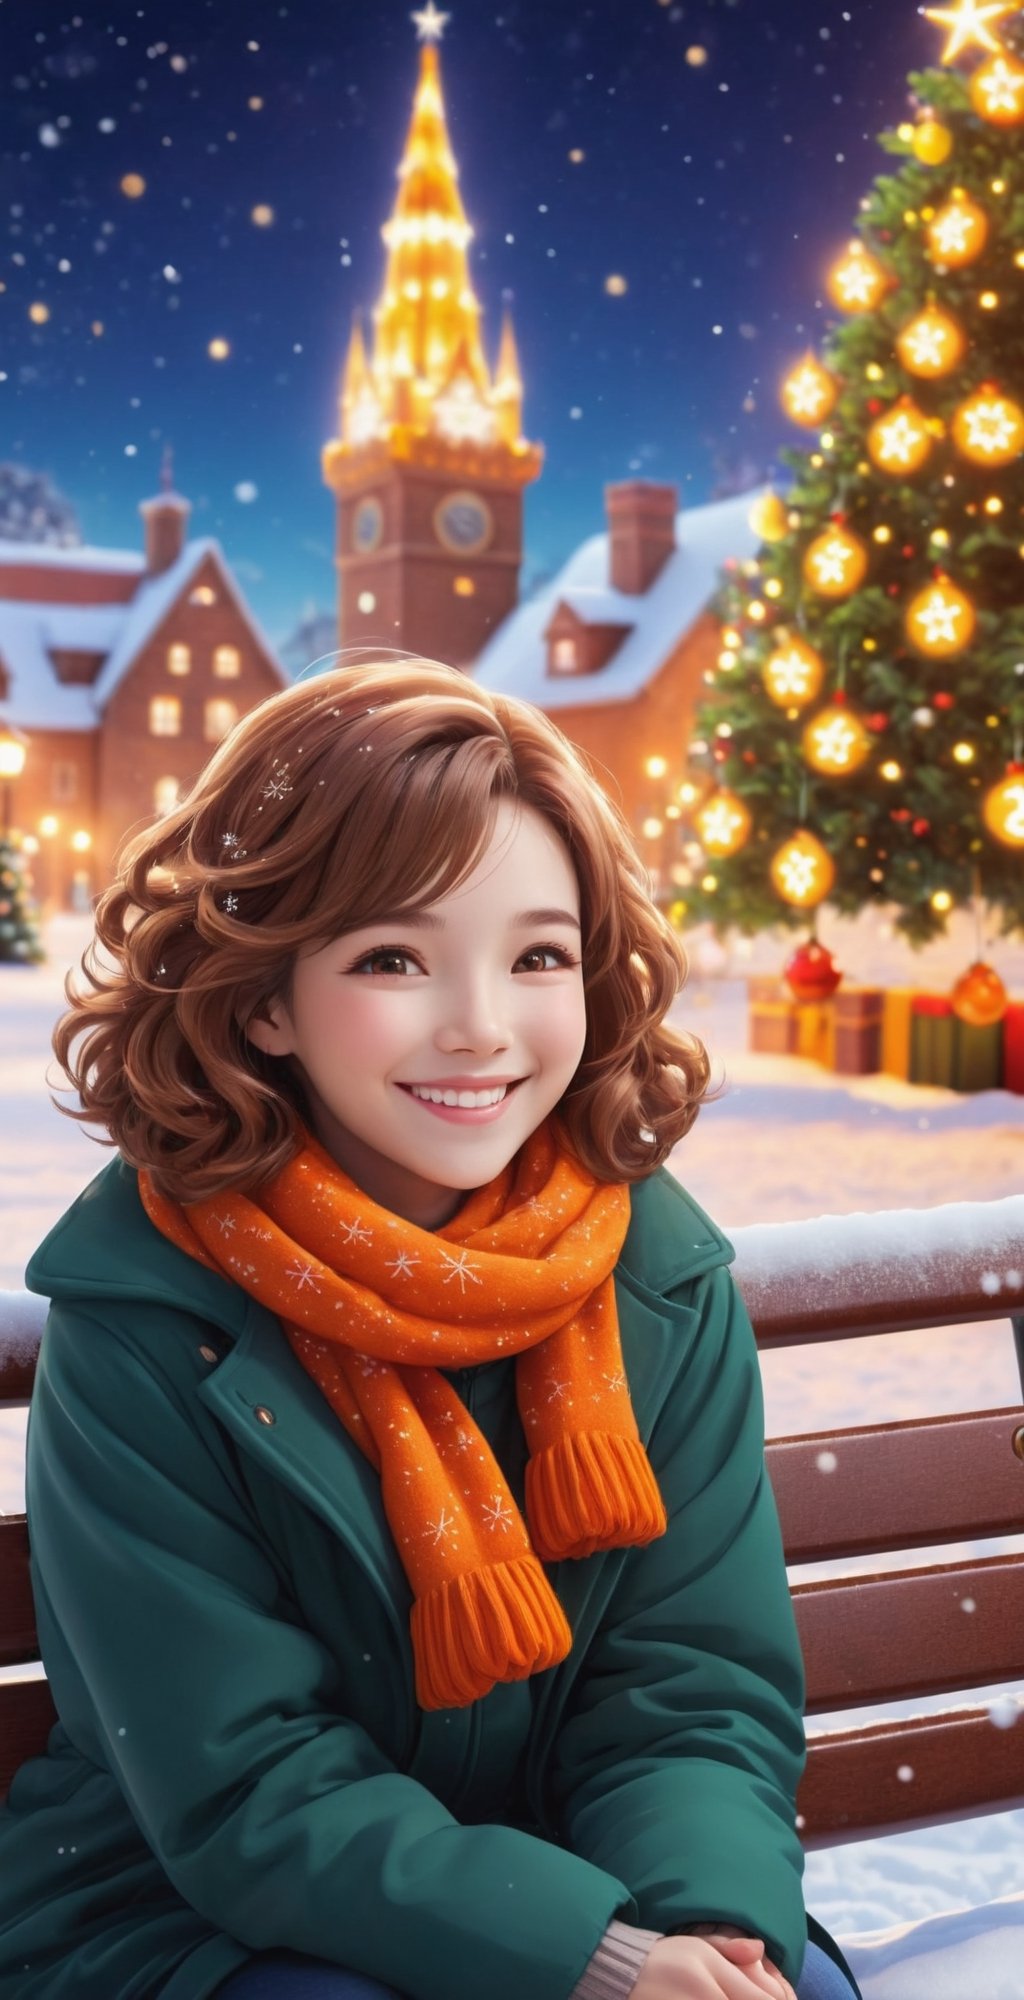 ("MERRY CHRISTMAS" text logo:1.5), A happily smiling woman (beautiful face), (Christmas Party:1.2), brown and orange tones, Christmas, grains of light, clock tower, glowing illuminations, illuminated scenery, silver world, snow, glowing snowflakes, Christmas neon lights, cute girl curled up to warm her hands, warm light, brick cityscape, bench, Christmas tree, short hair, happiness, joyful smiles. Epic, Celestial, decoration, fantasy world, cute world,Anime,Text